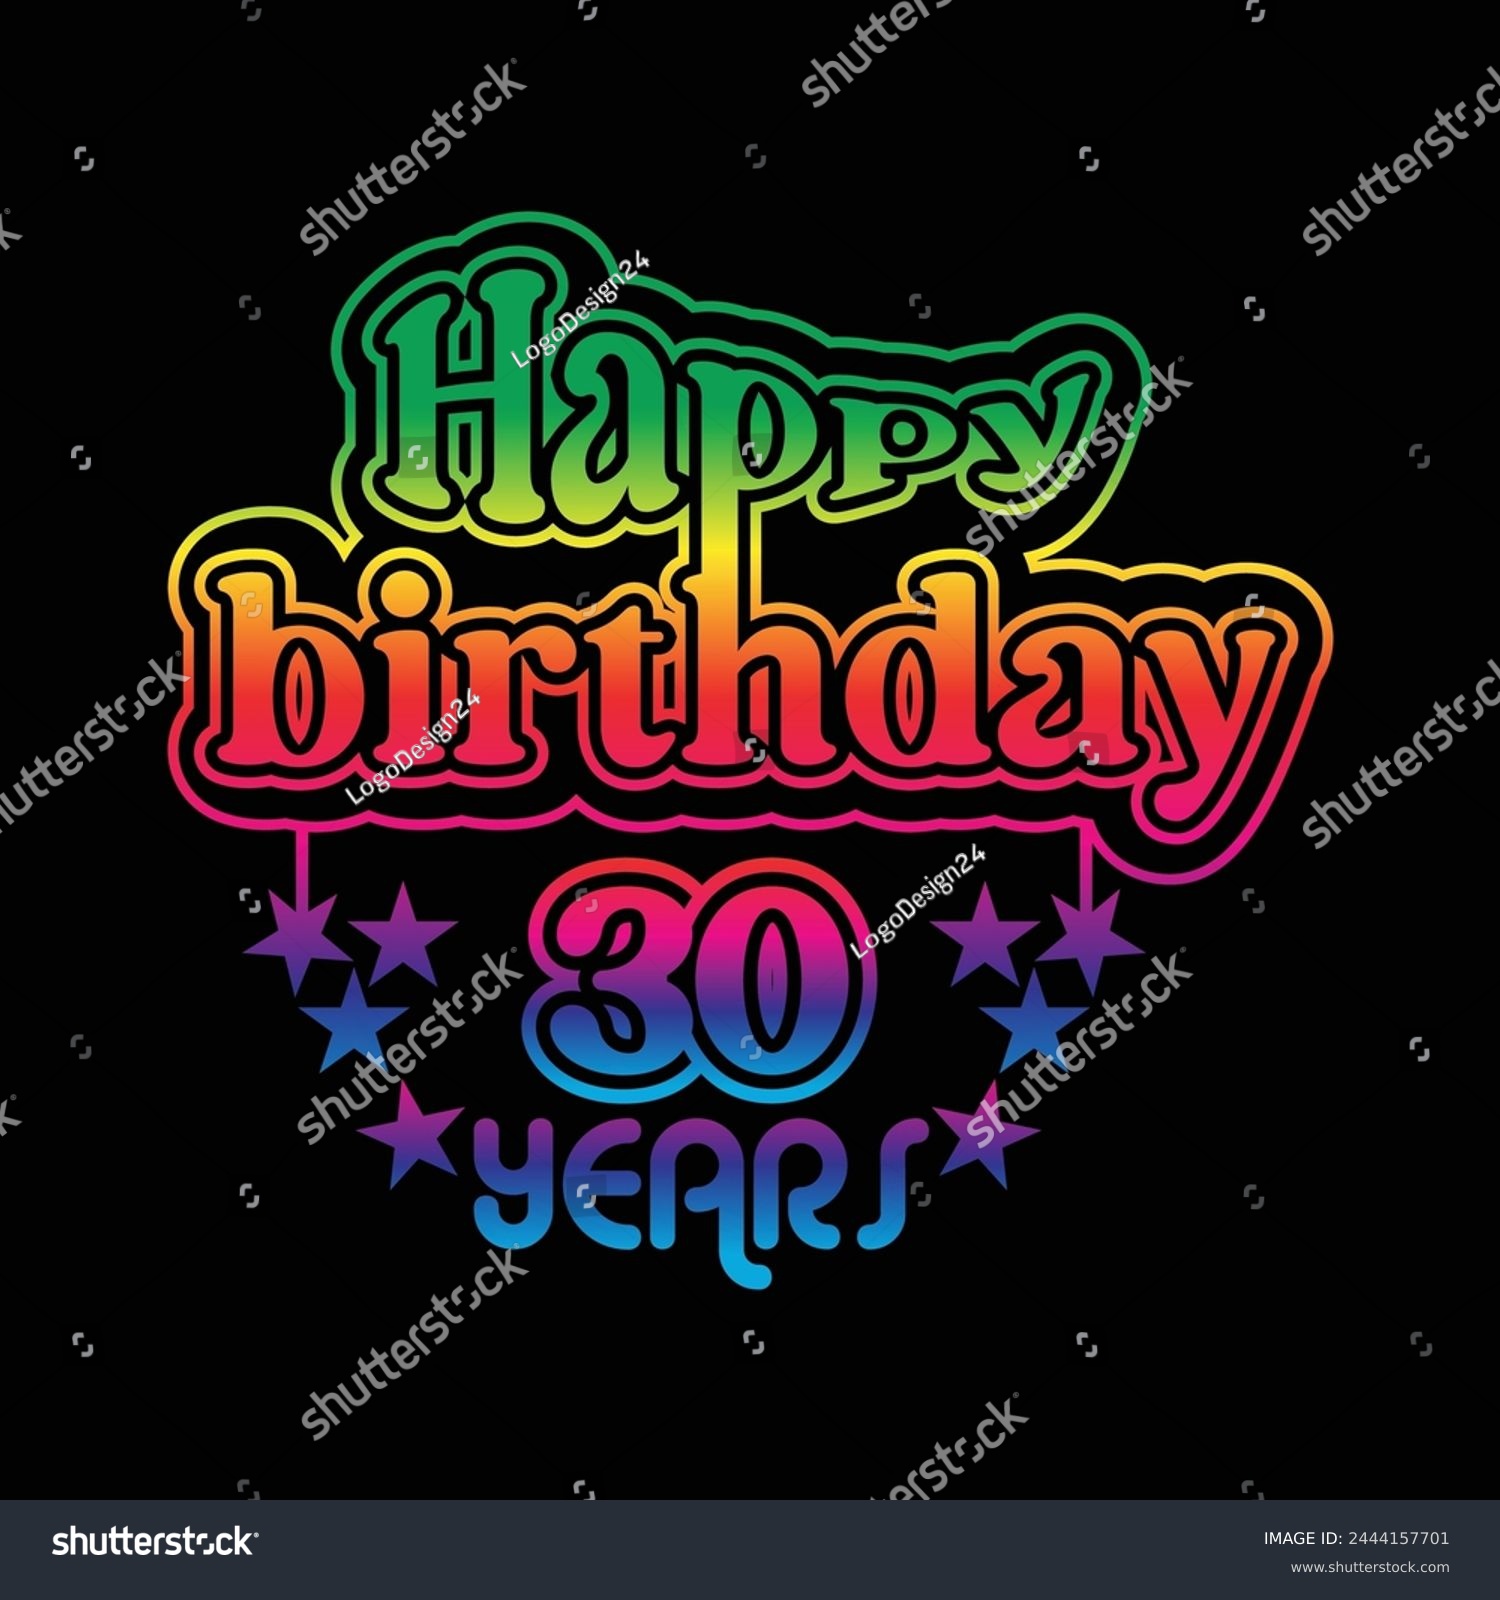 SVG of 30 Years  Birthday Celebrating. A Community Organized Event. Colorful Design svg